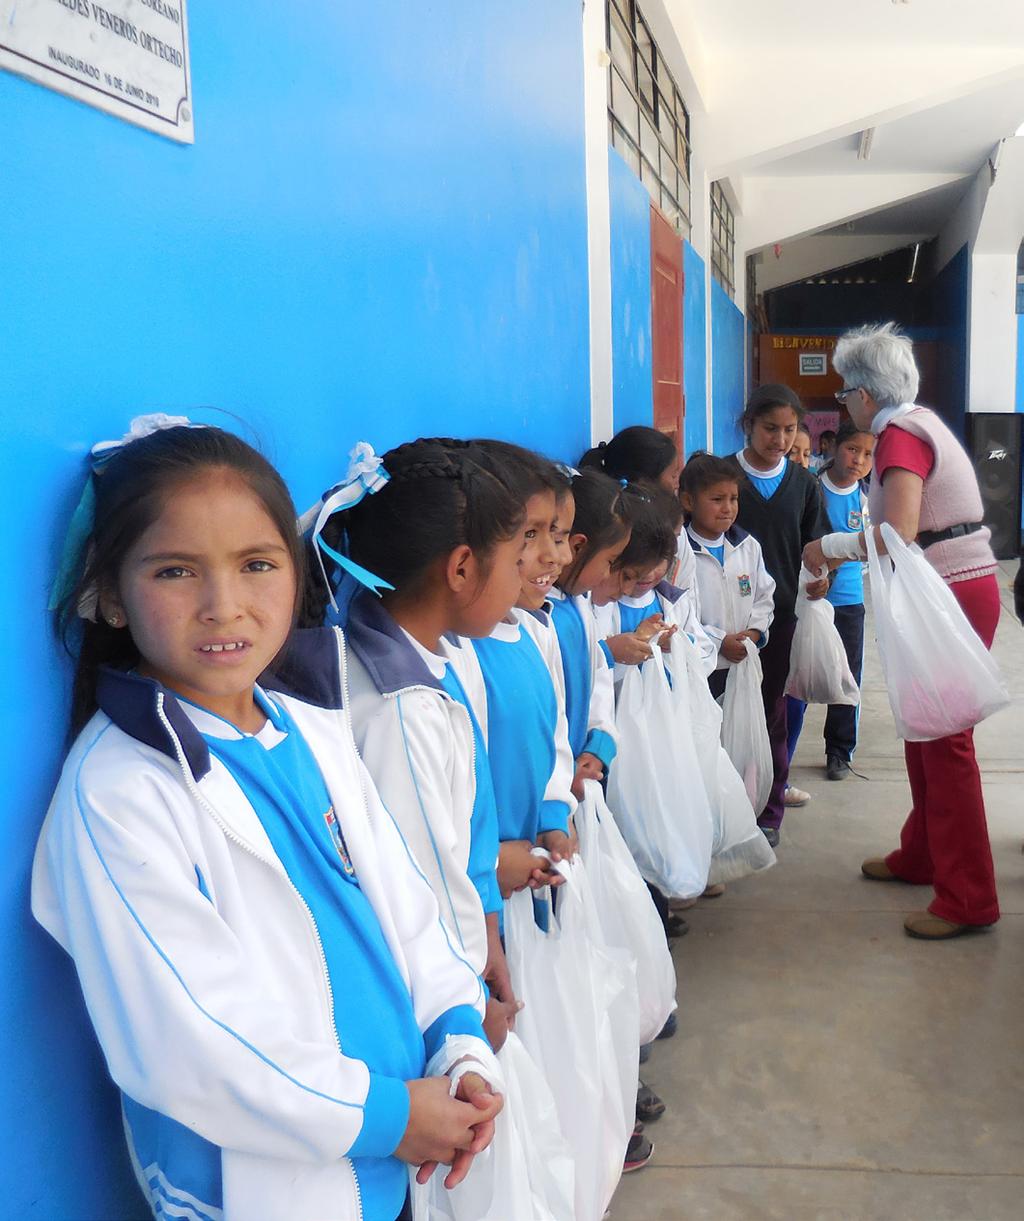 scarves, blankets, and other supplies to 170 students of the Alcides Carrión school, in the village of Pango (3,600 m elevation) in La Libertad, located in northern Peru.